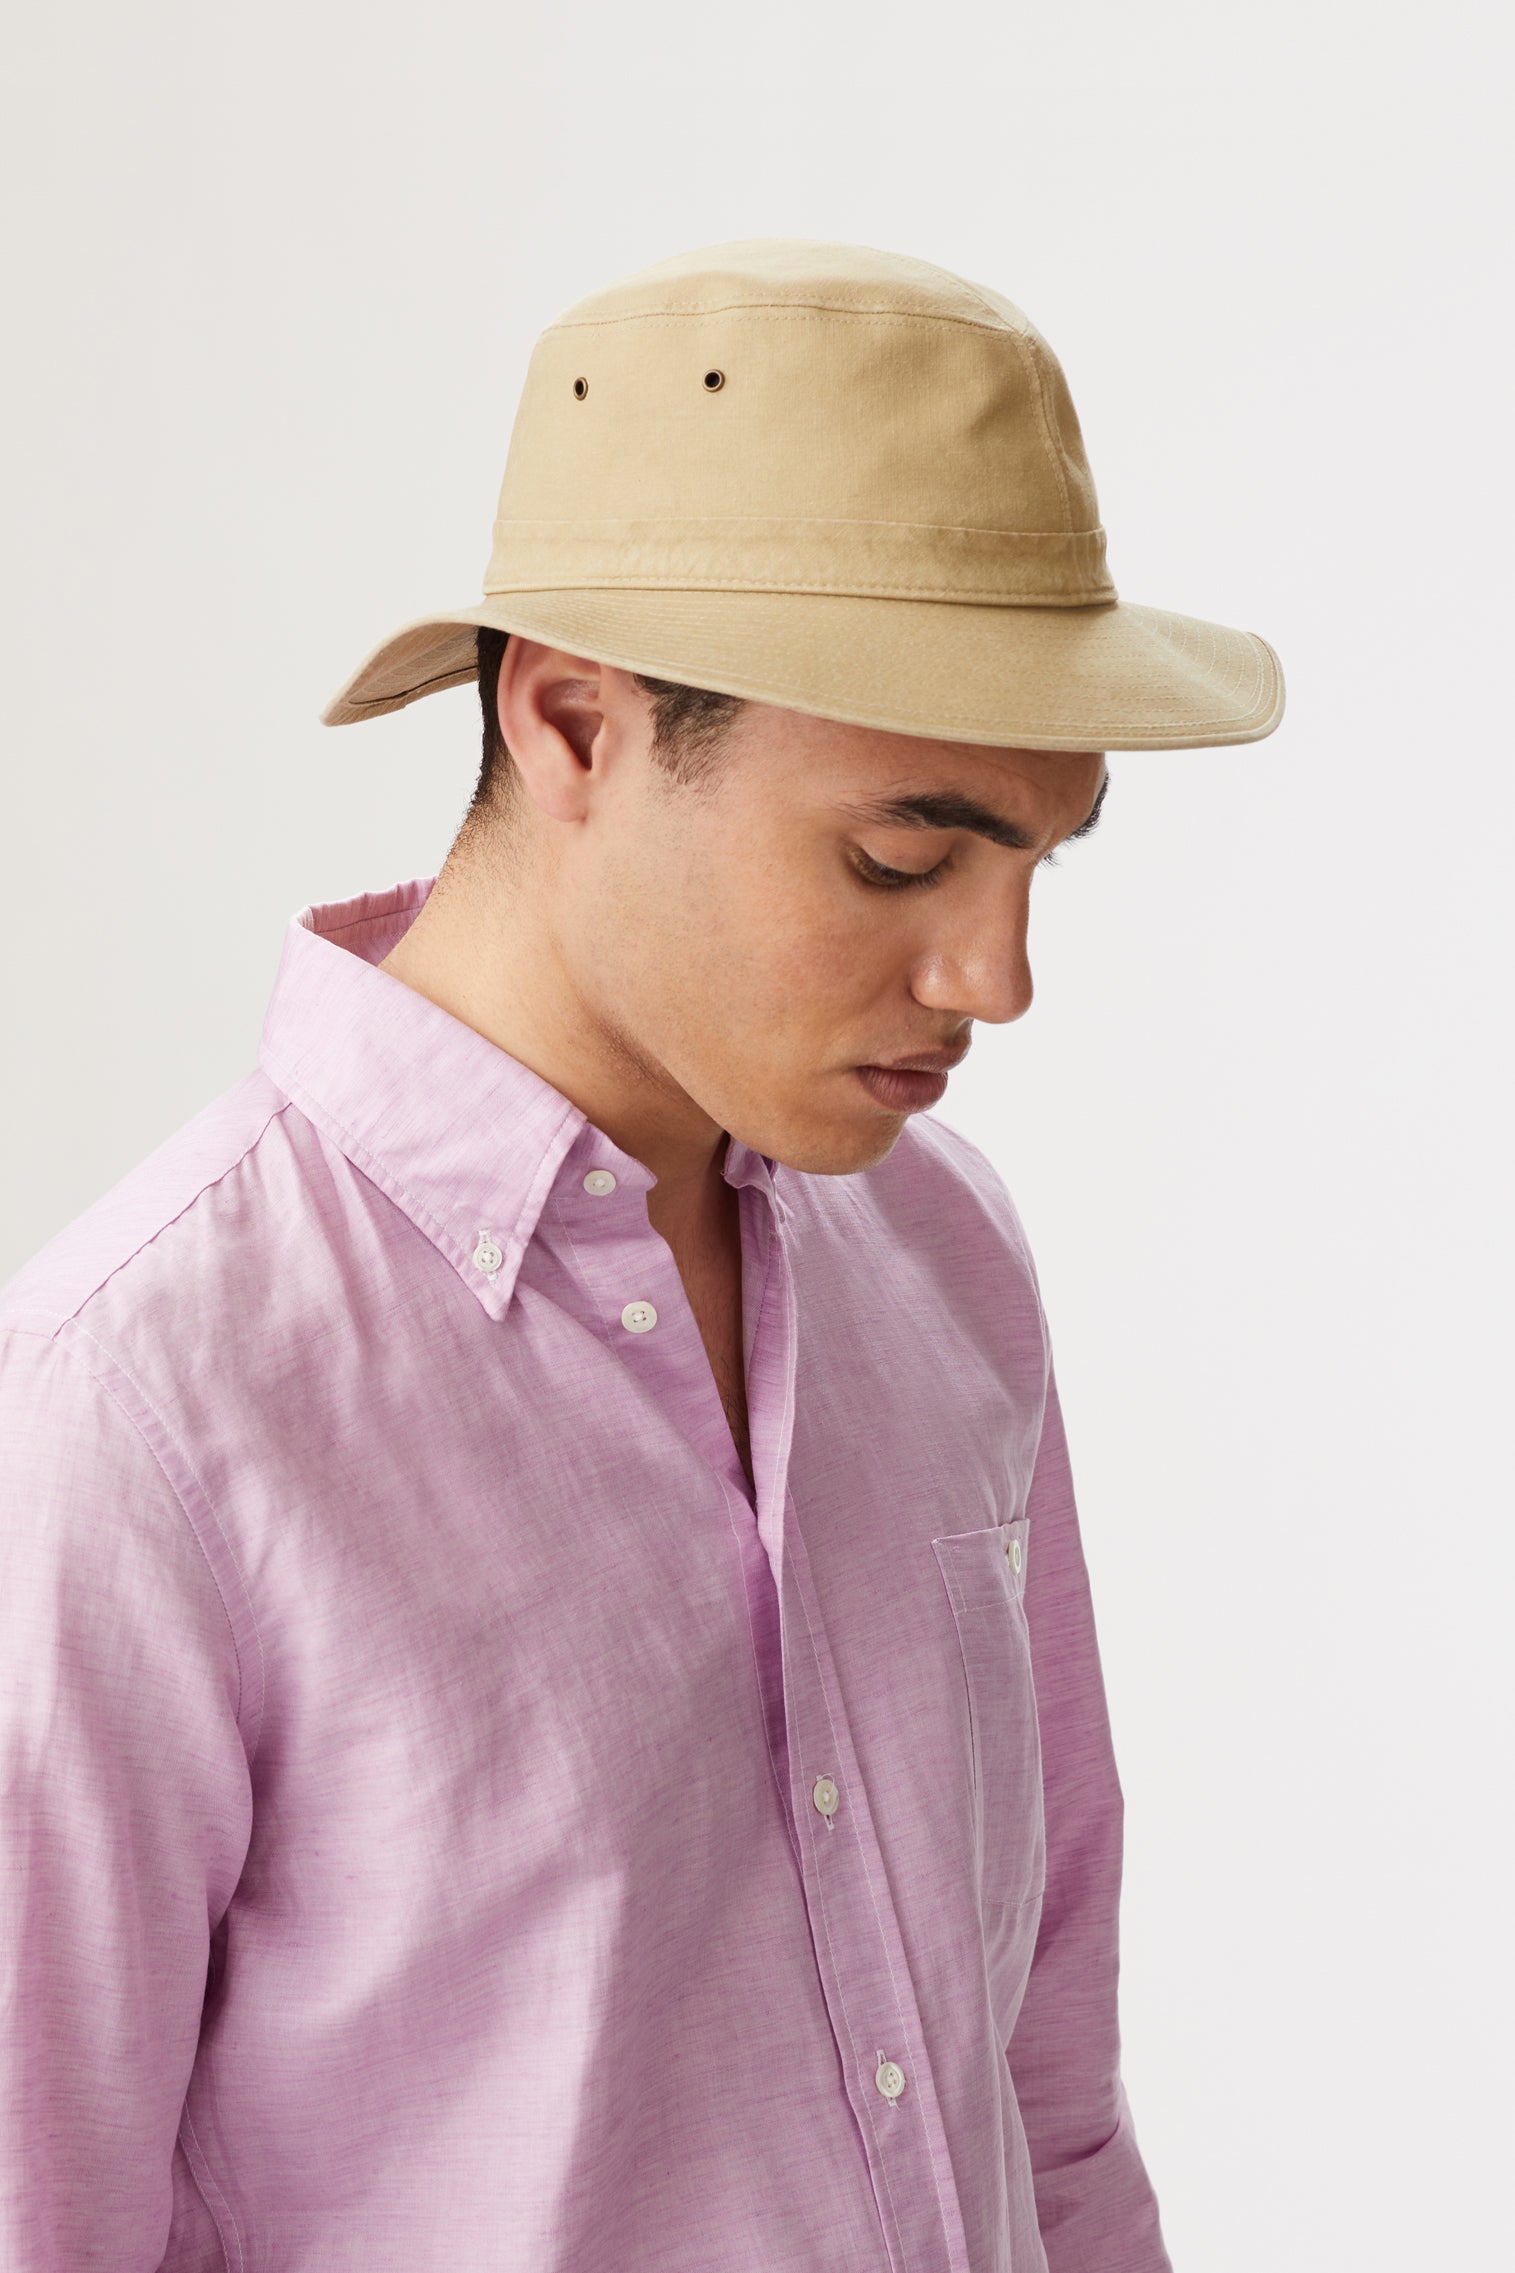 Men's Packable and Rollable Hats & Caps - Lock & Co. Hatters